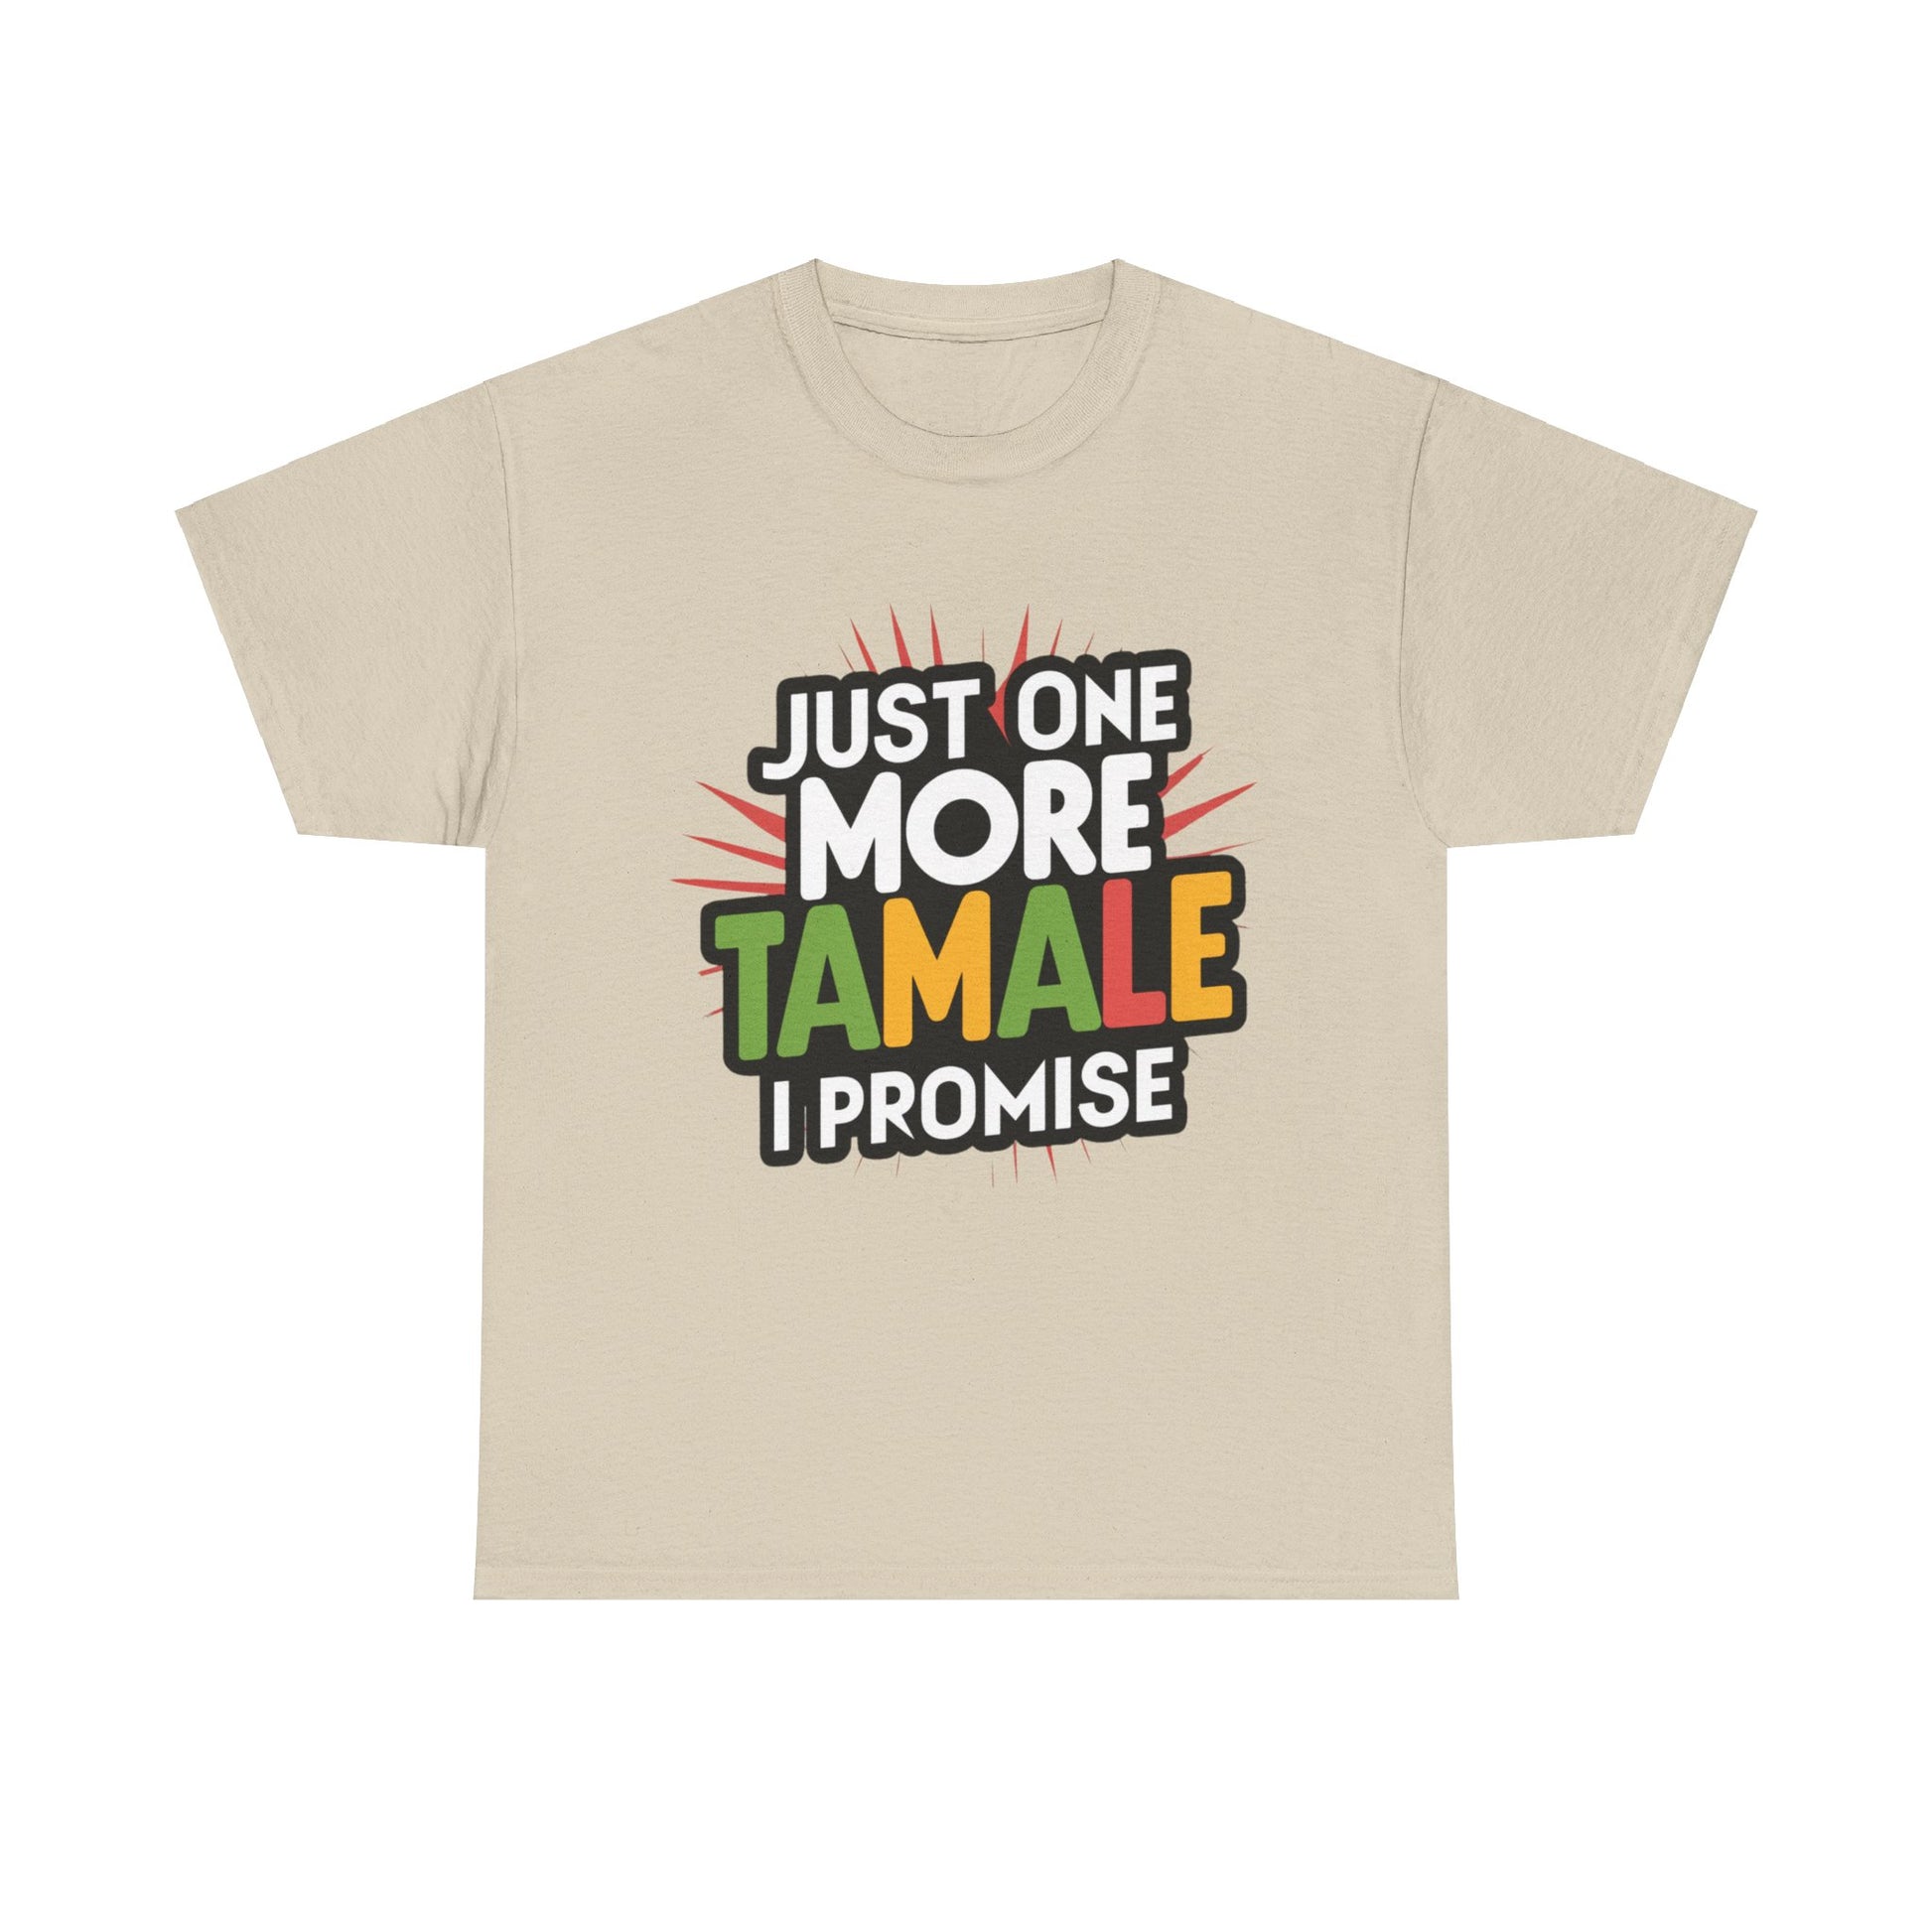 Just One More Tamale I Promise Mexican Food Graphic Unisex Heavy Cotton Tee Cotton Funny Humorous Graphic Soft Premium Unisex Men Women Sand T-shirt Birthday Gift-8